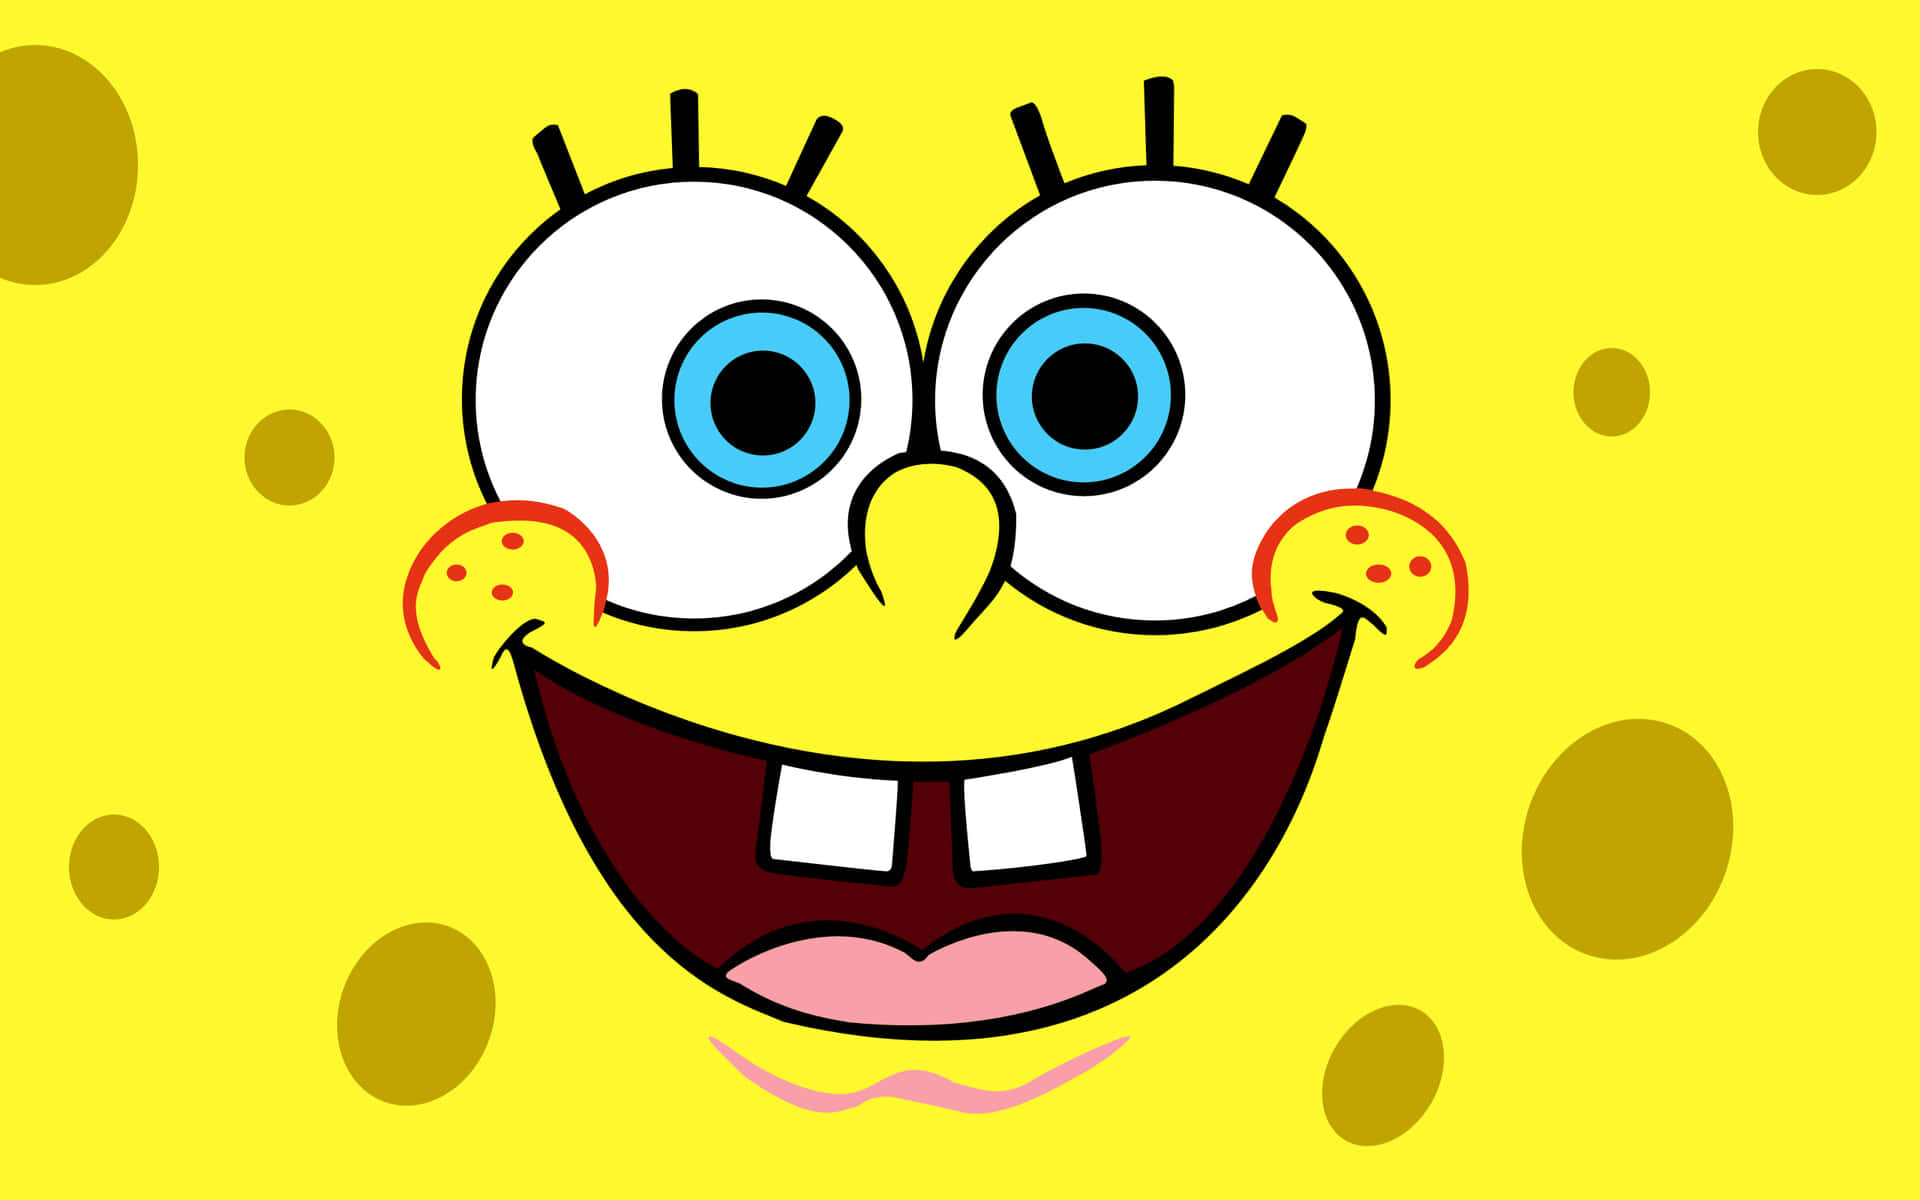 Put on your best face and join SpongeBob on adventures!